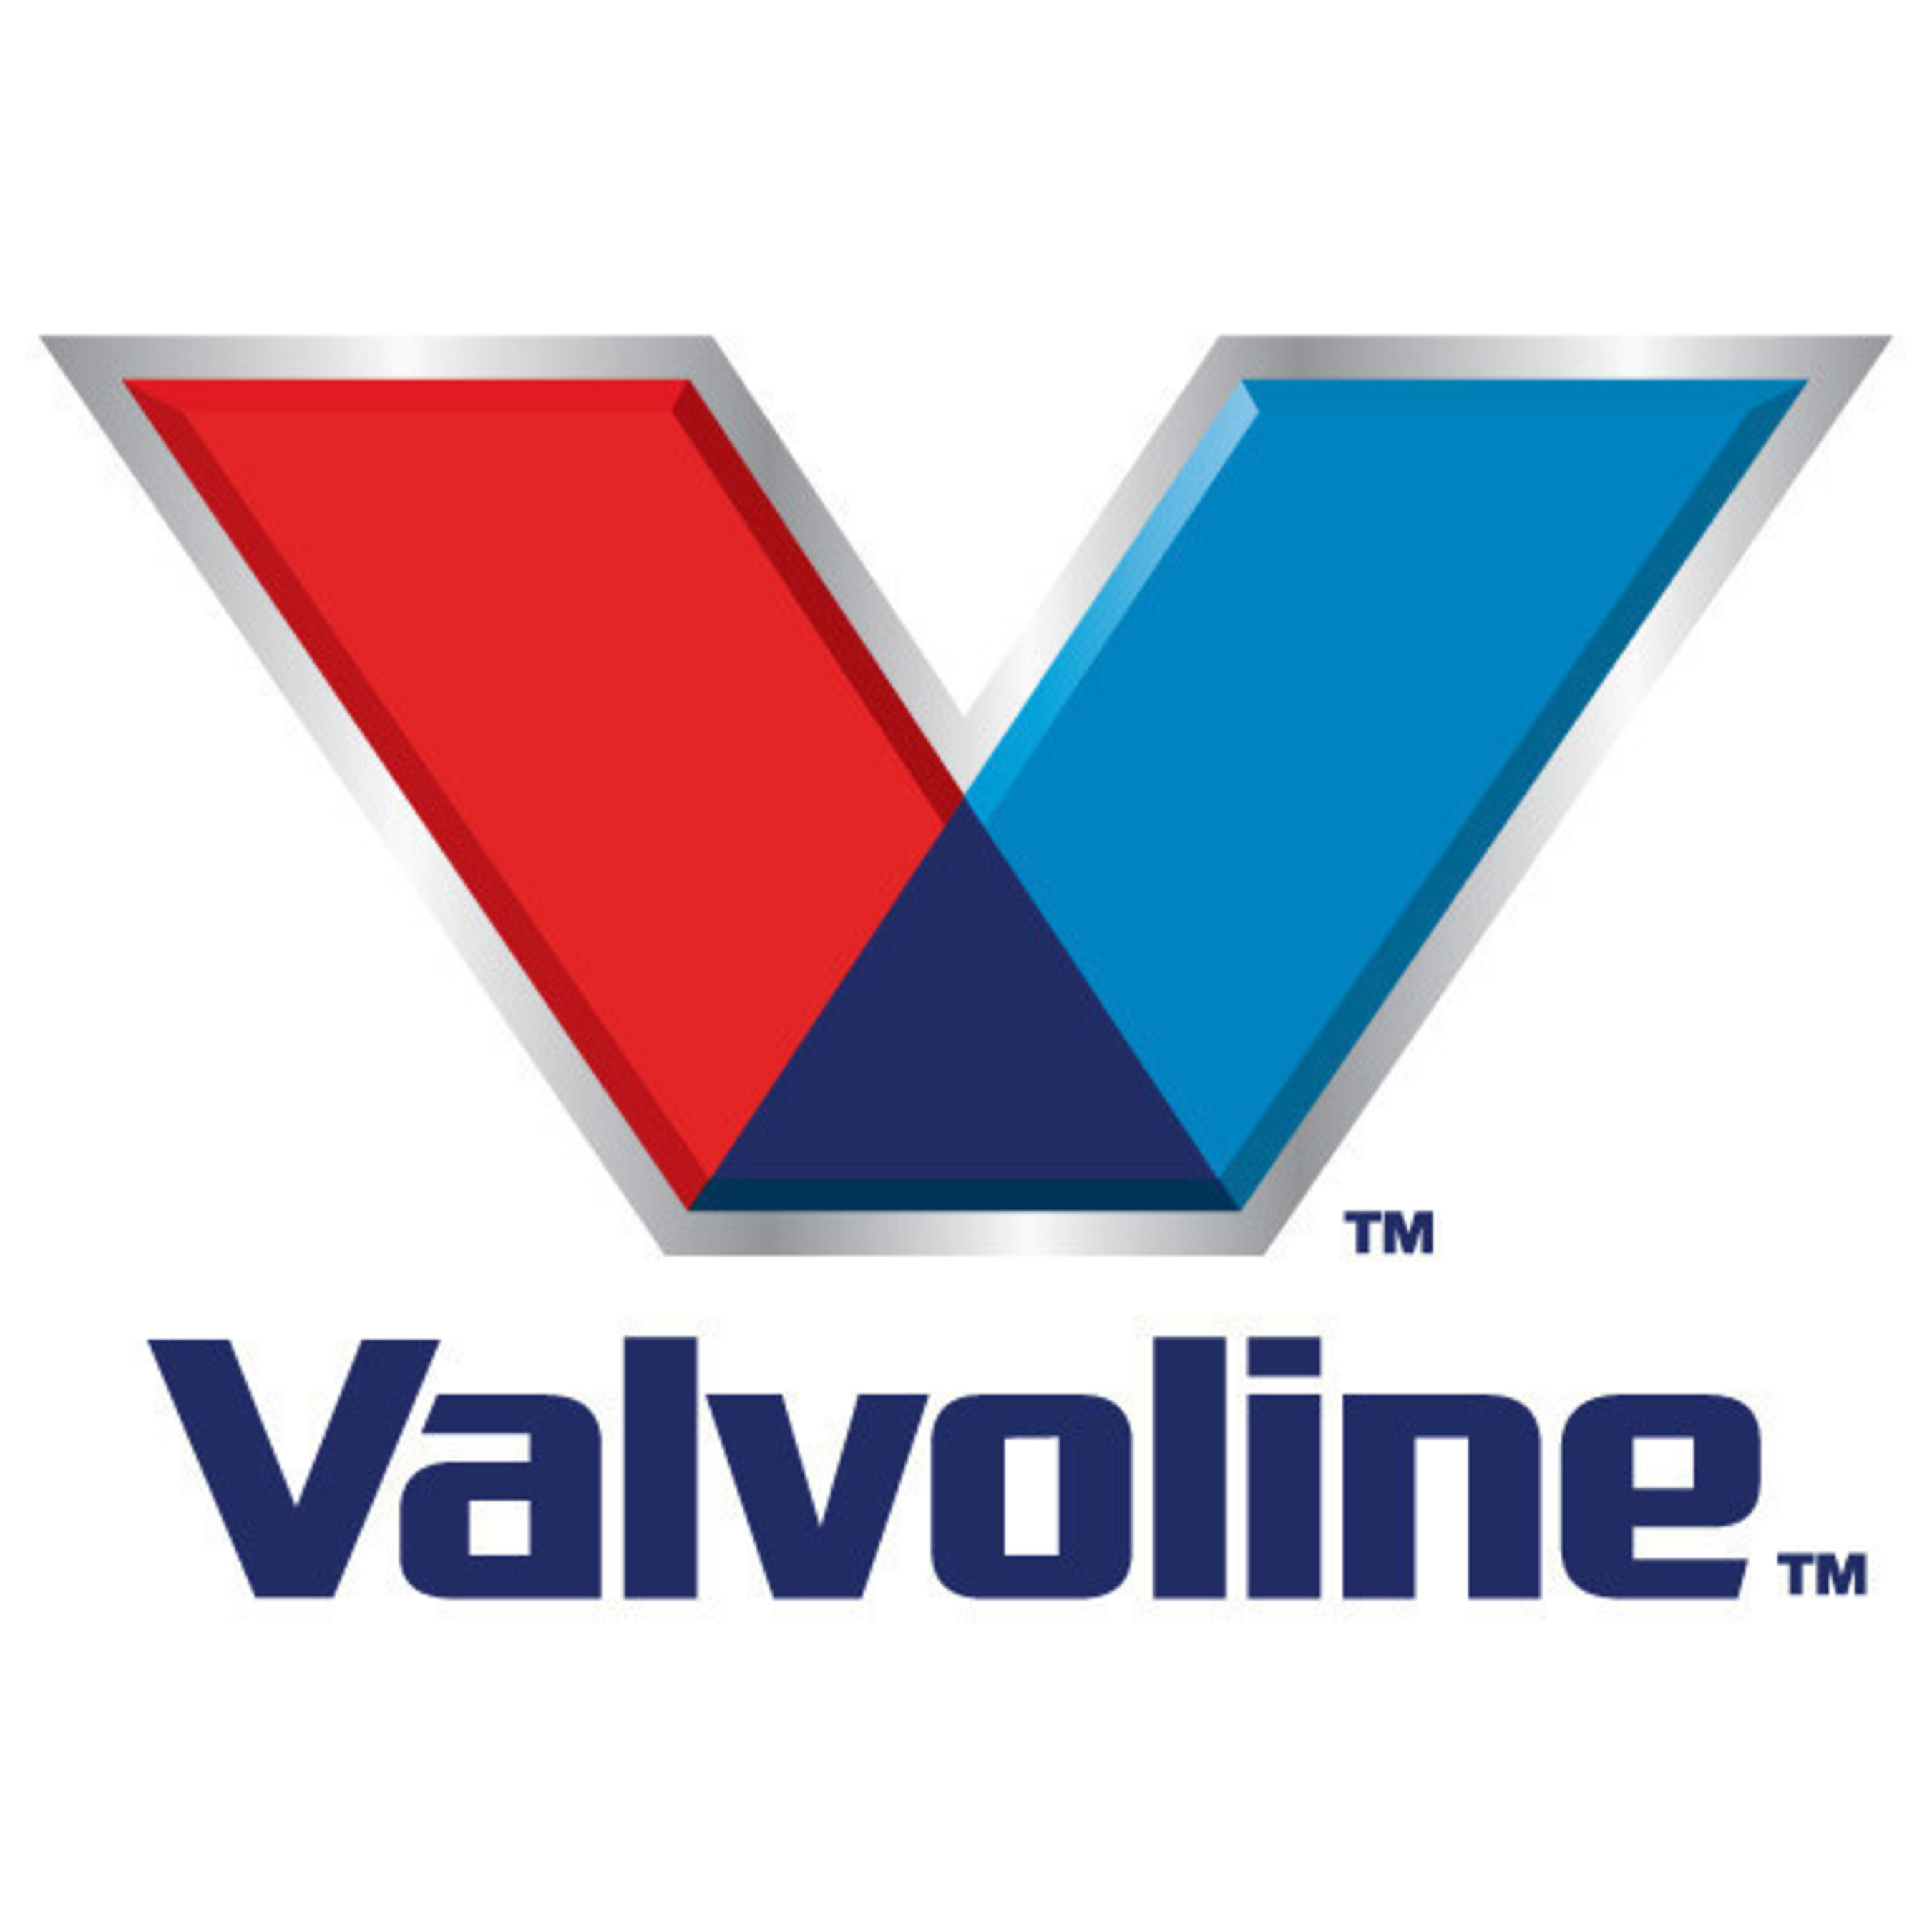 Valvoline(TM) to Construct Two Stock-Full Class Trucks for Baja 1000 Competition